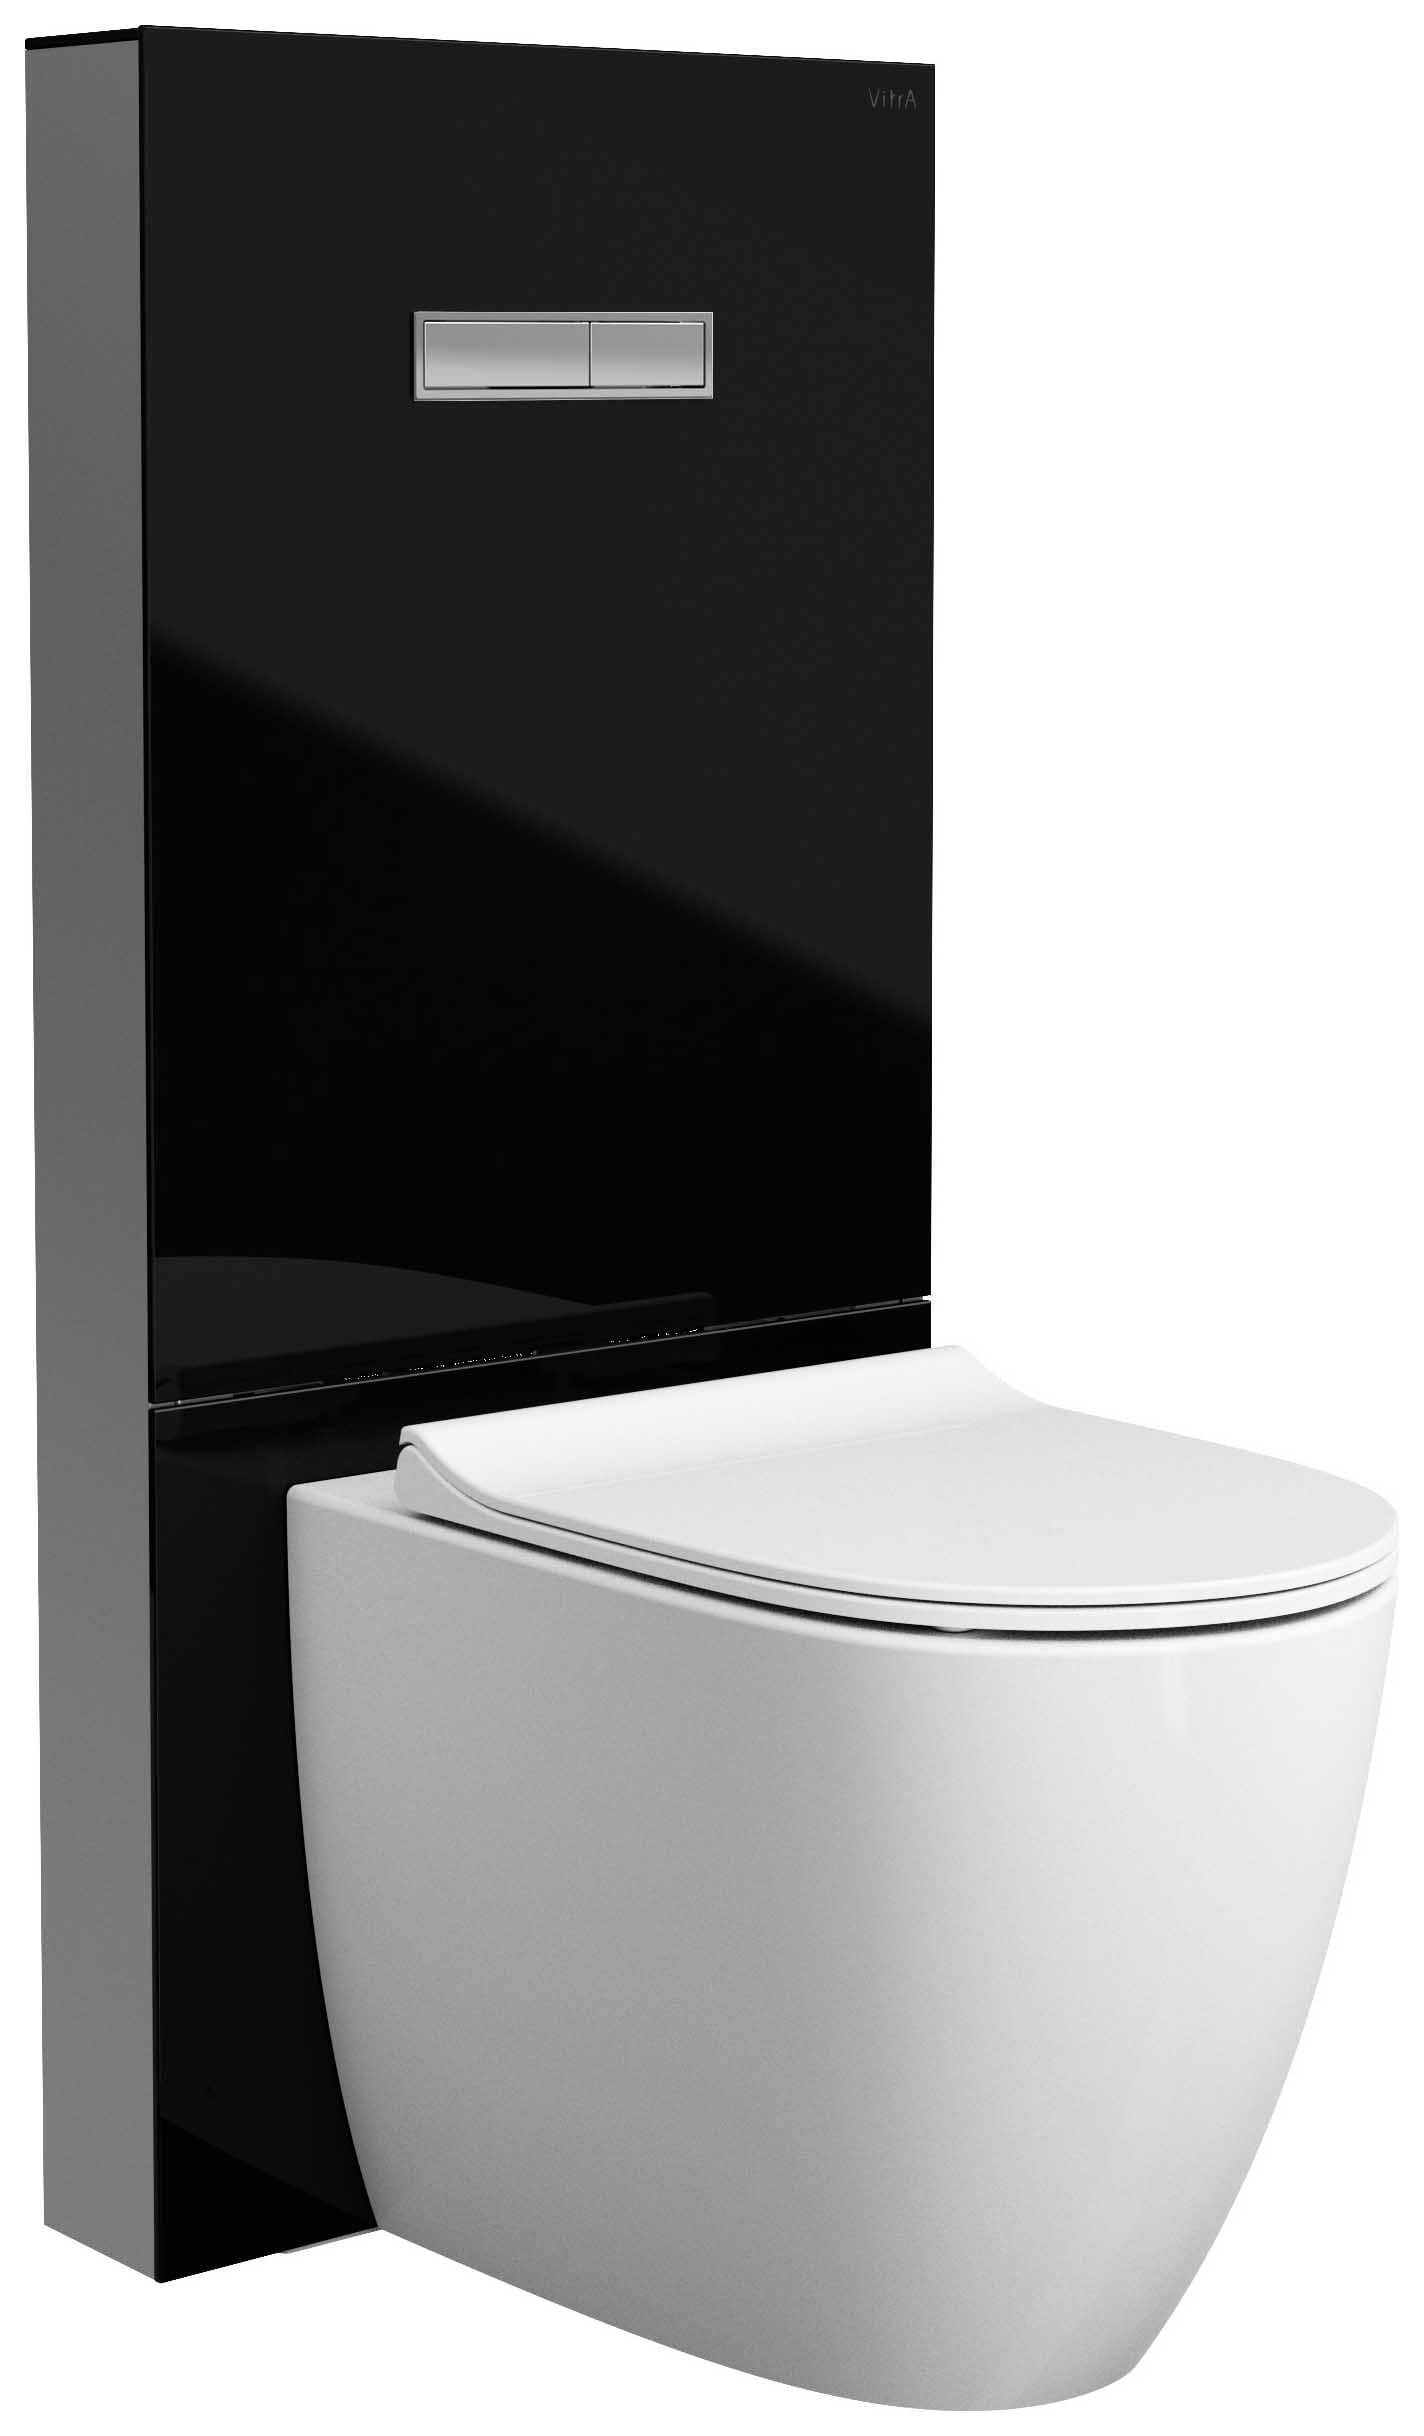 Vitra Vitrus Glass Surround Concealed Cistern for Back